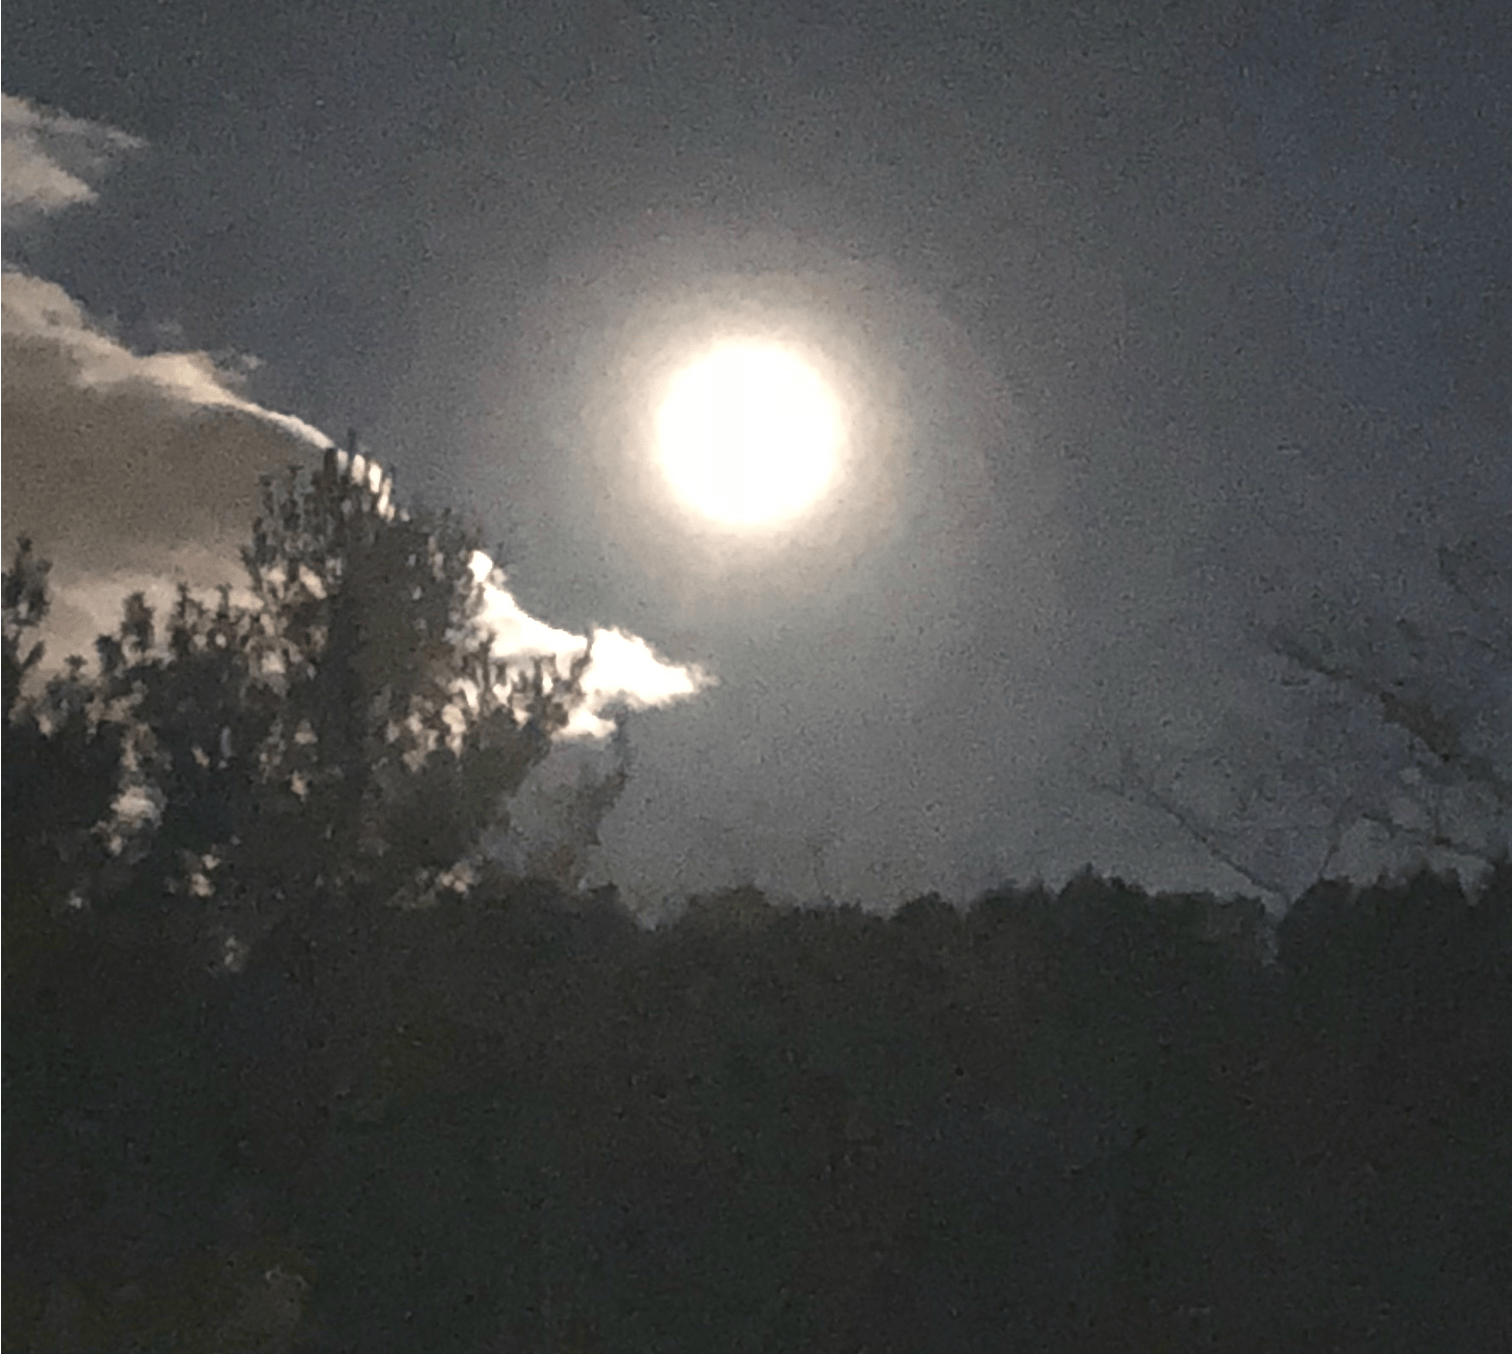 Pic of the full moon